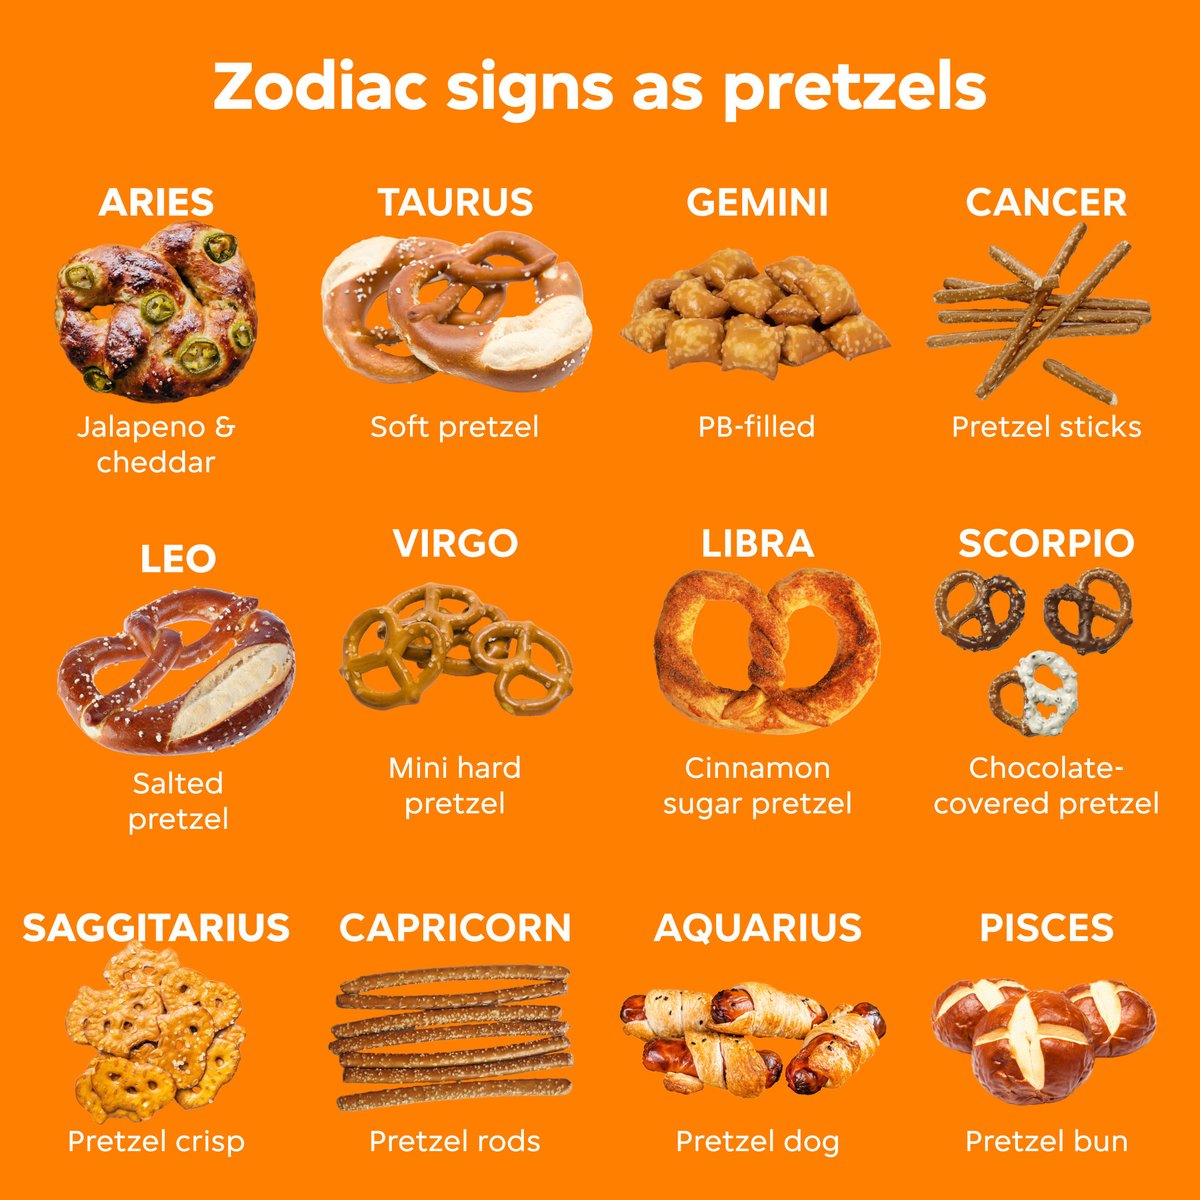 Did we get it right? Reply with your sign & pretzel 🥨